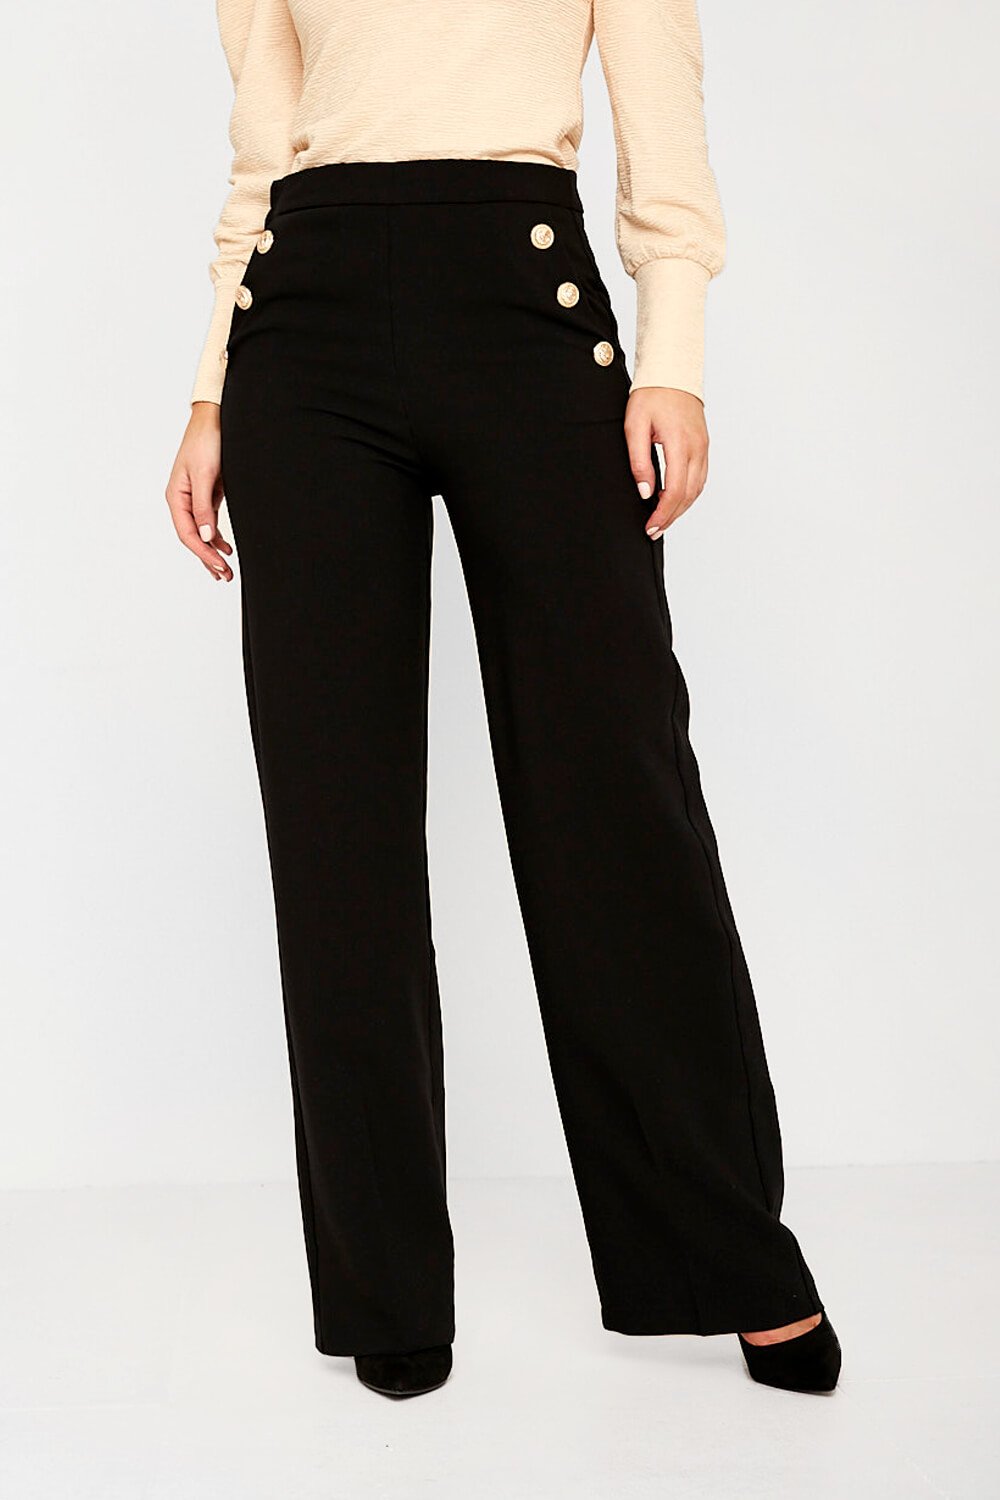 Sailor Wide Leg Trousers in Black | iCLOTHING - iCLOTHING